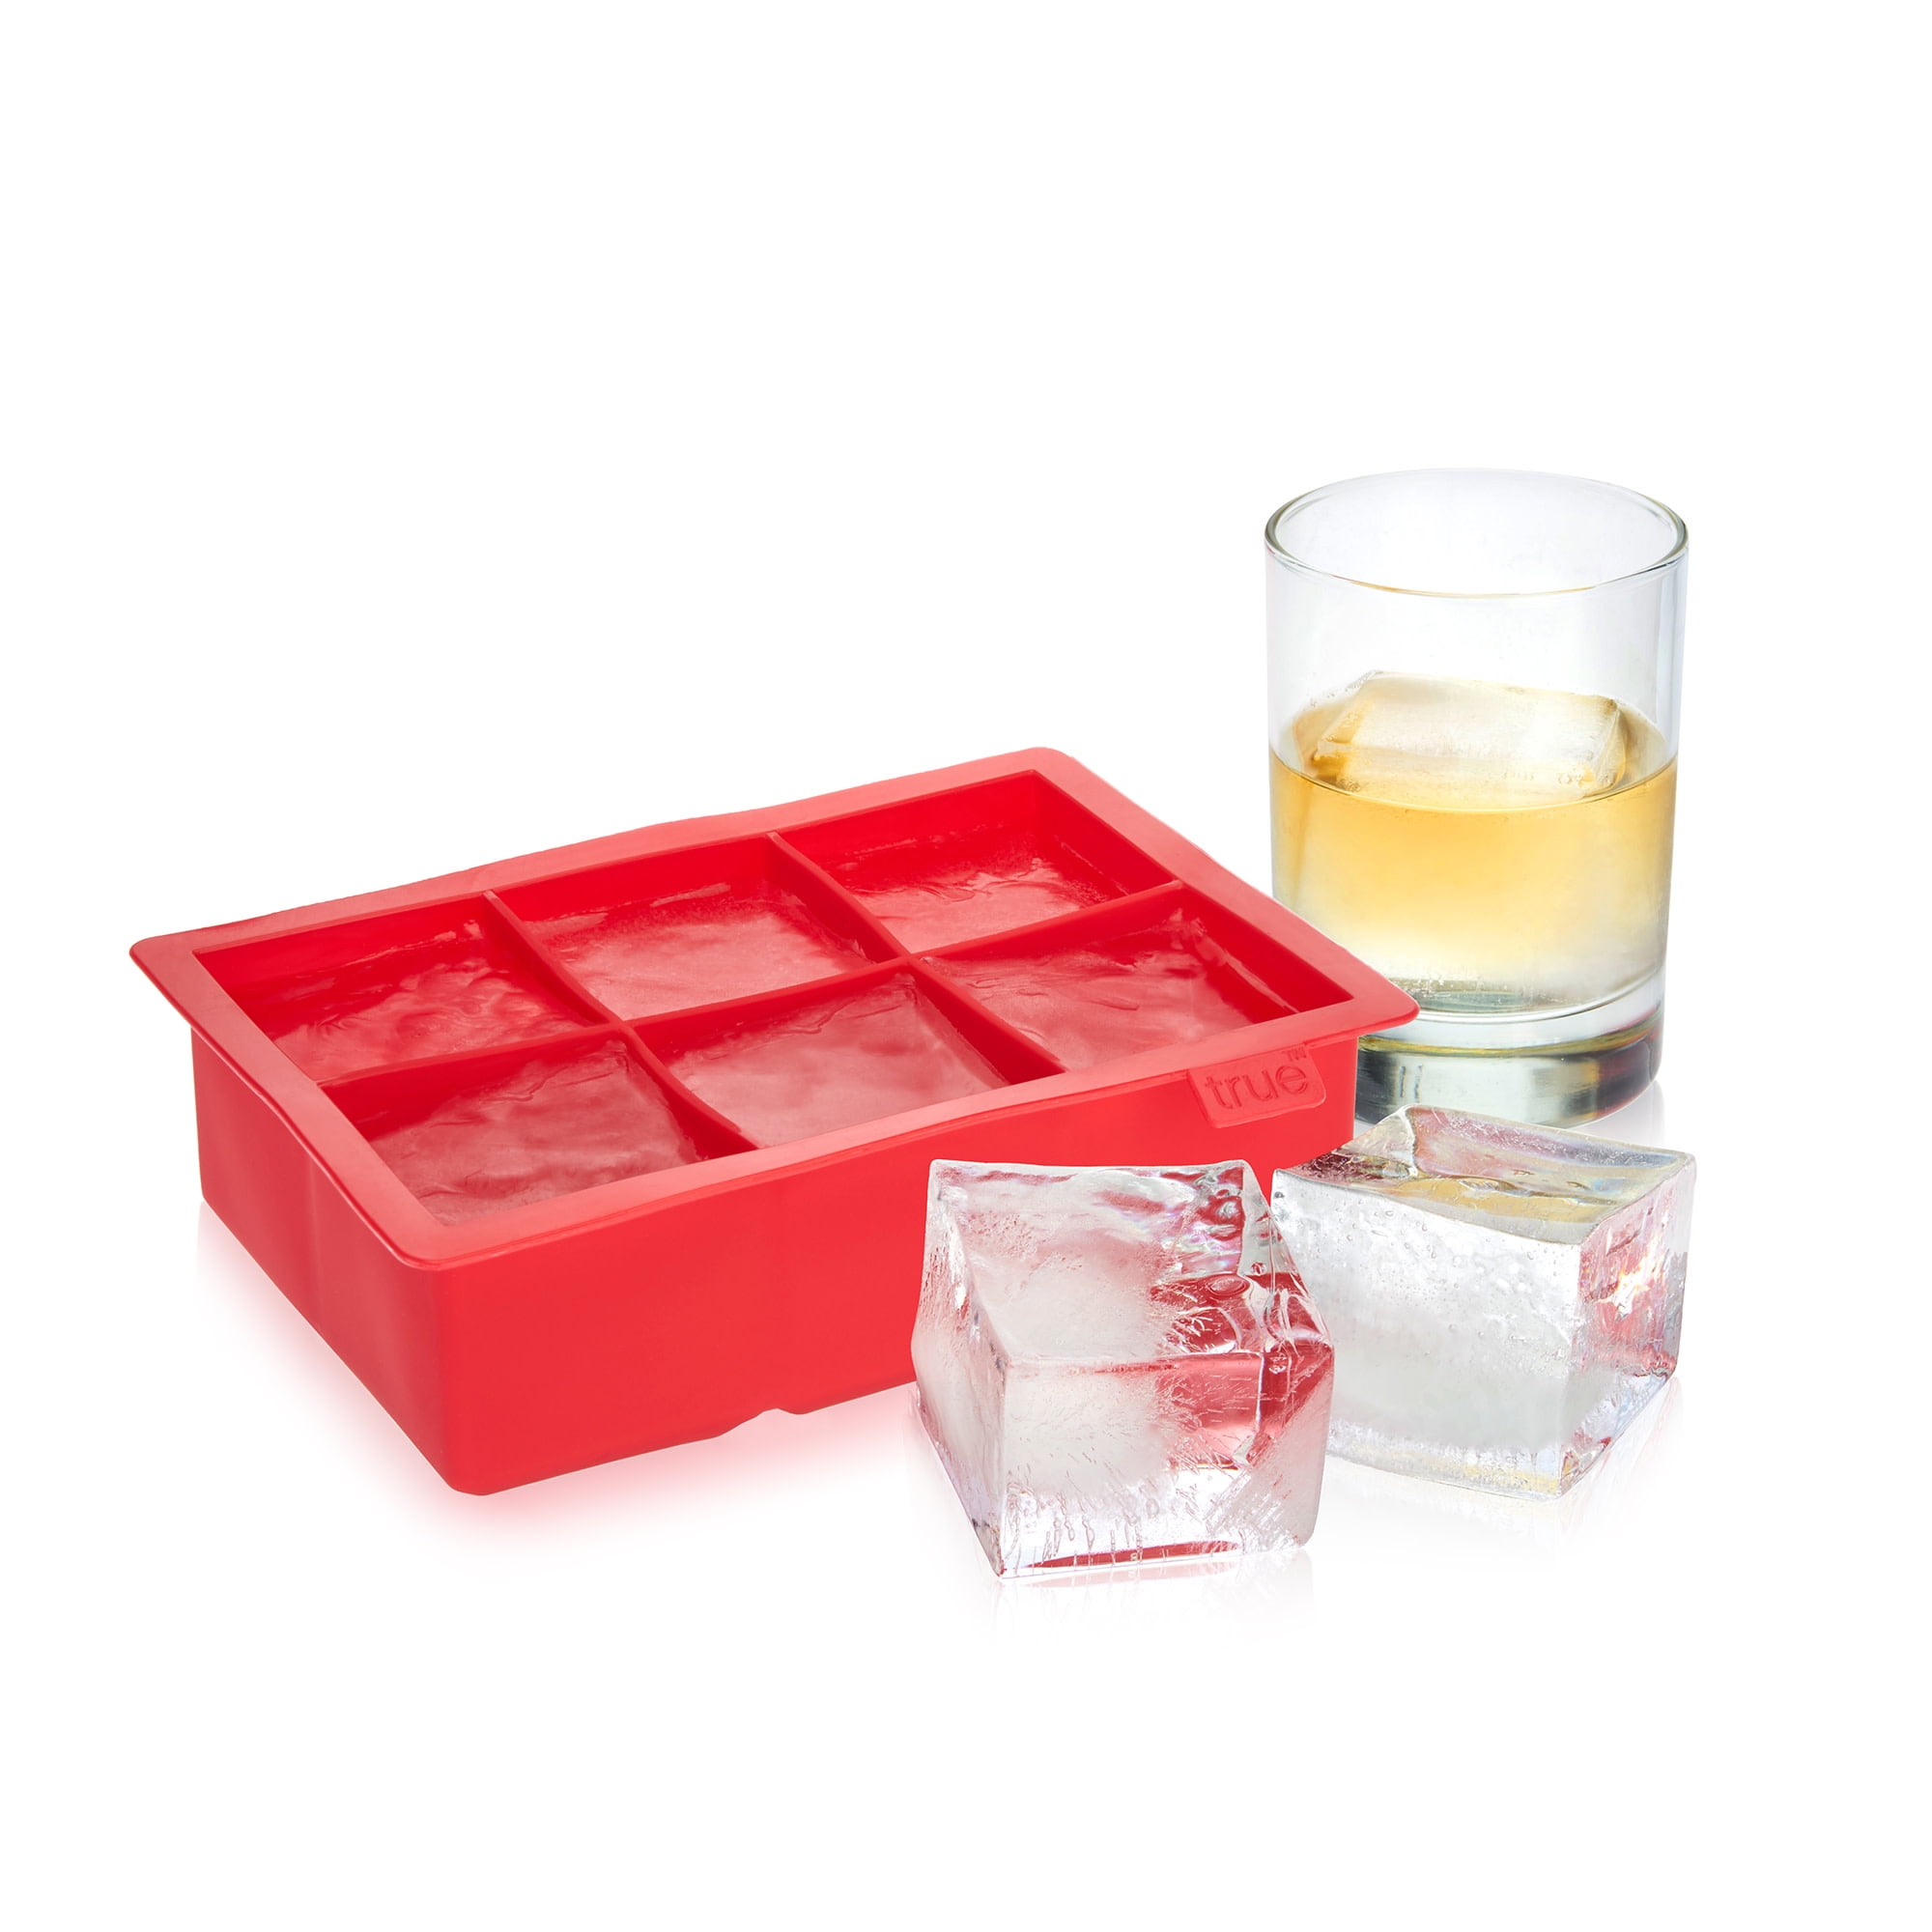 STL file Ice cube tray - Fridge - Ice cube - Home - Cocktail